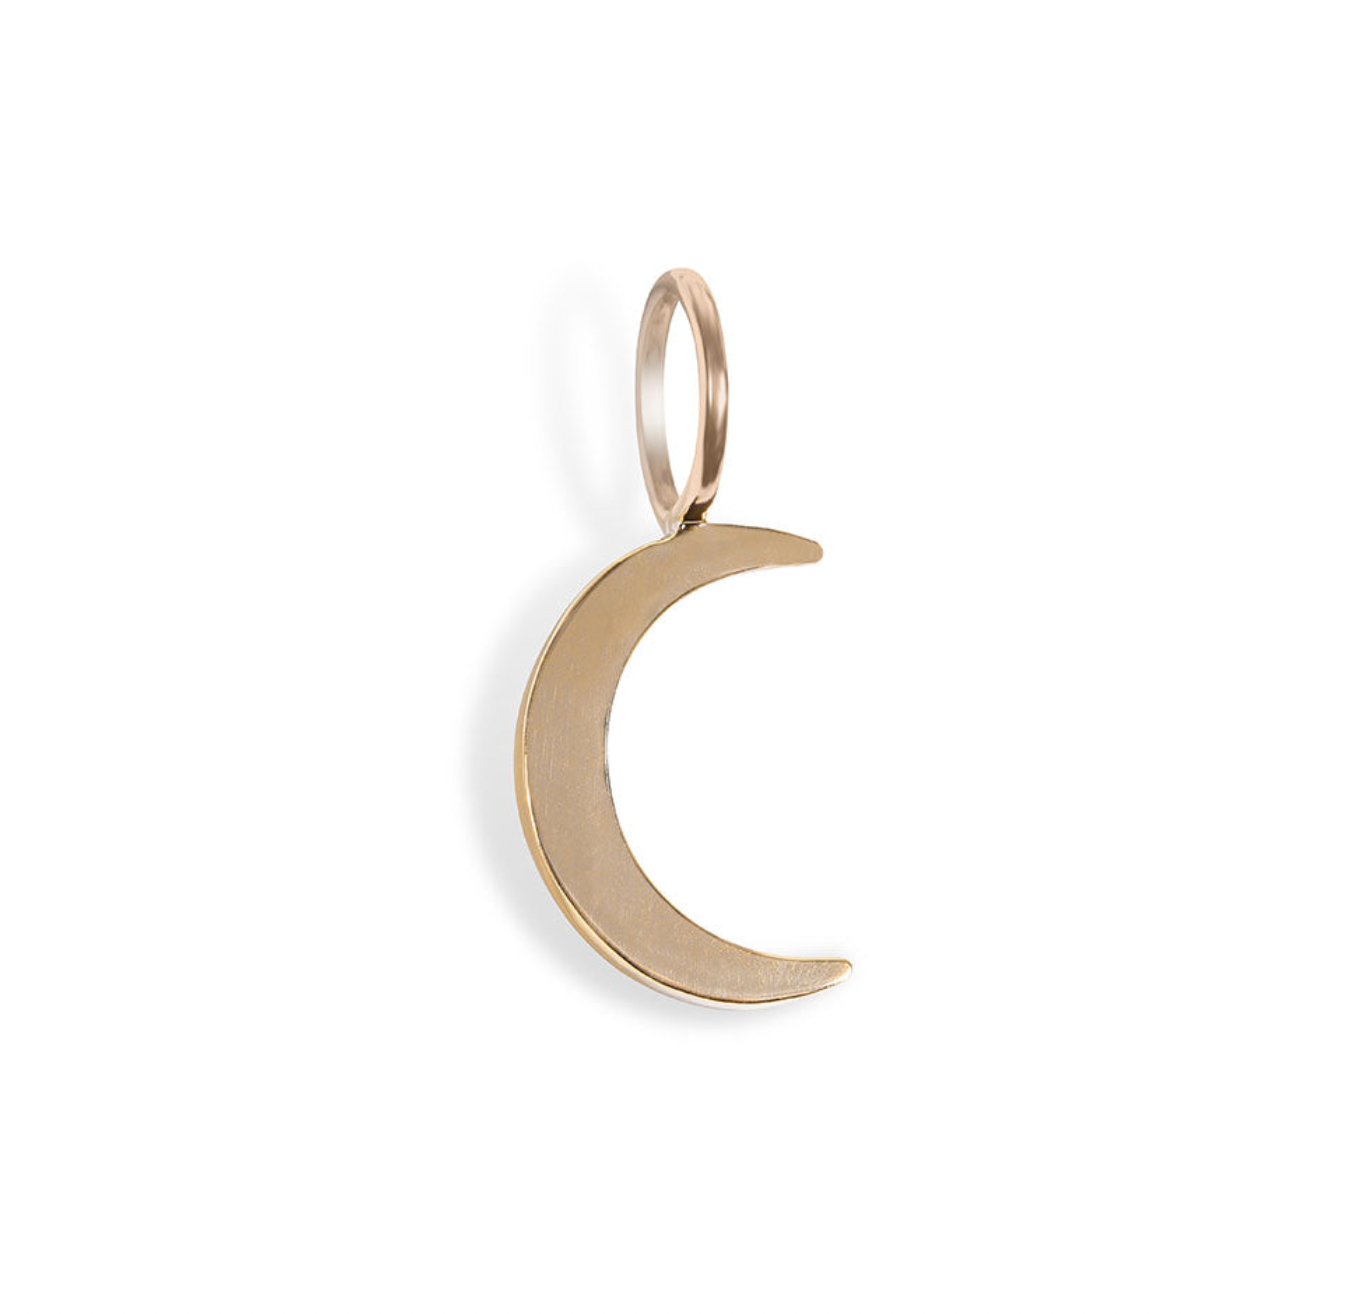 14K GOLD SMALL CRESCENT MOON CHARM